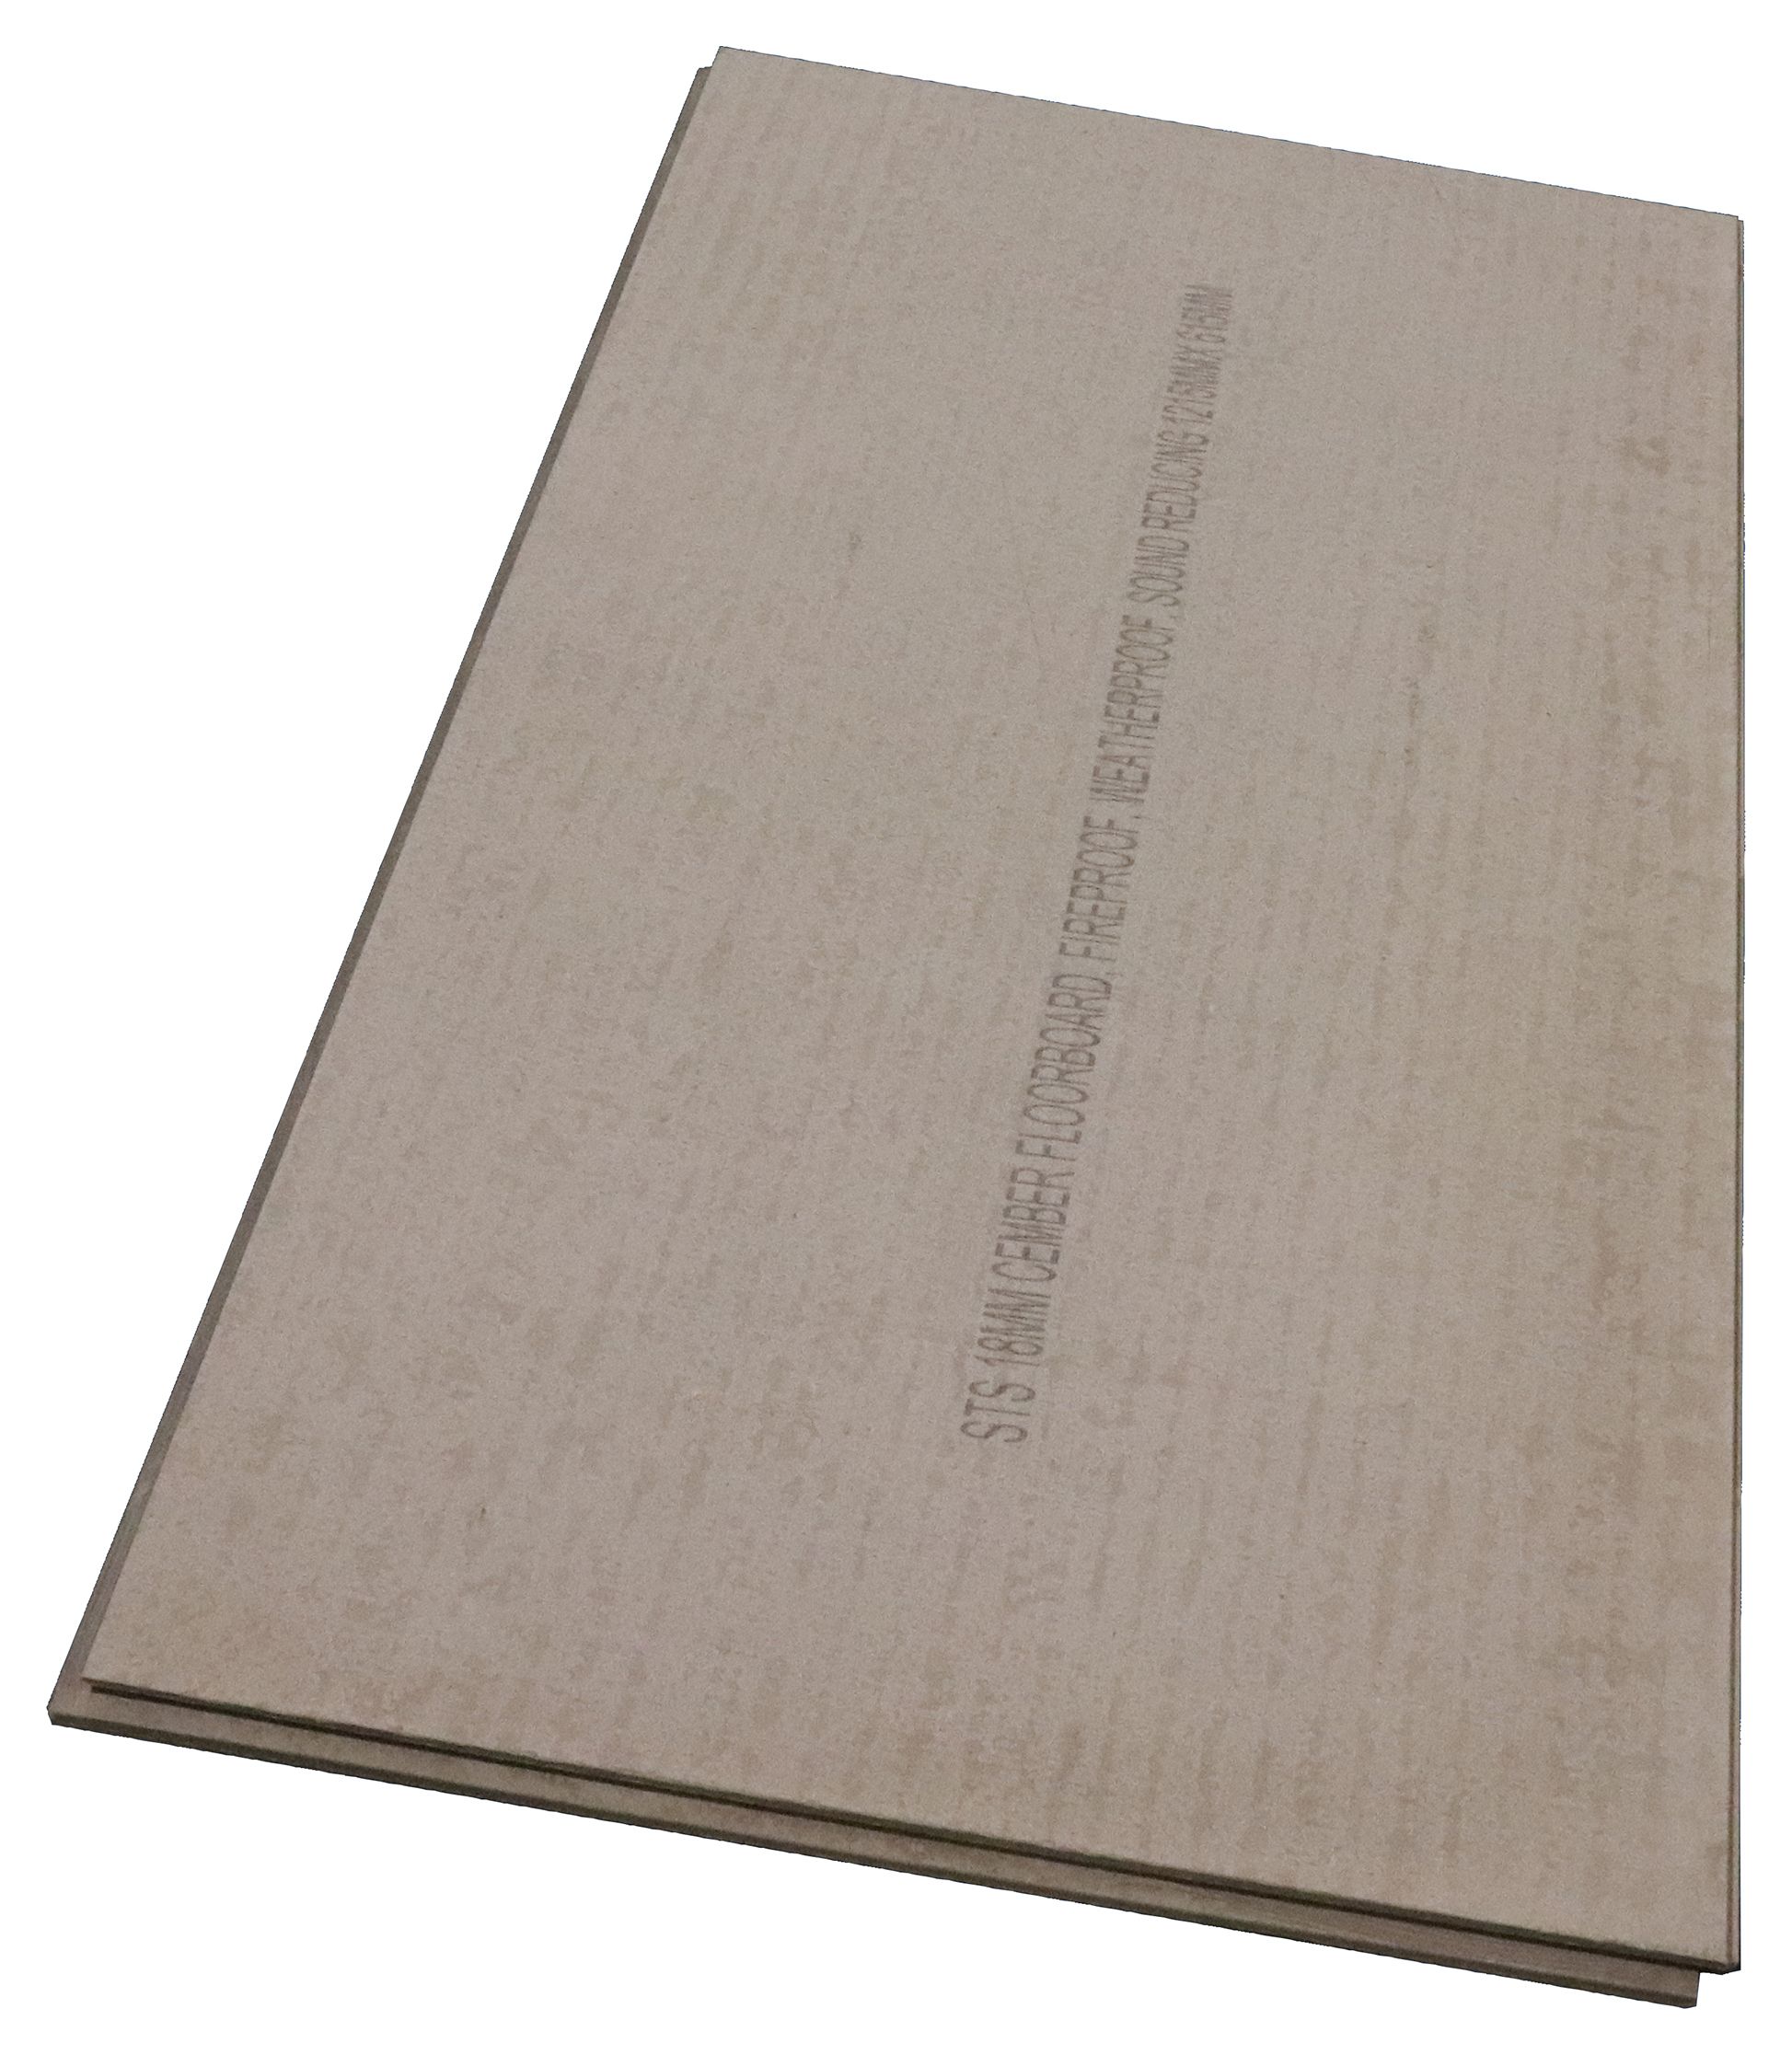 STS NoMorePly TG4 Tile Backer Floor Board - 1200 x 600 x 18mm - Pack of 25